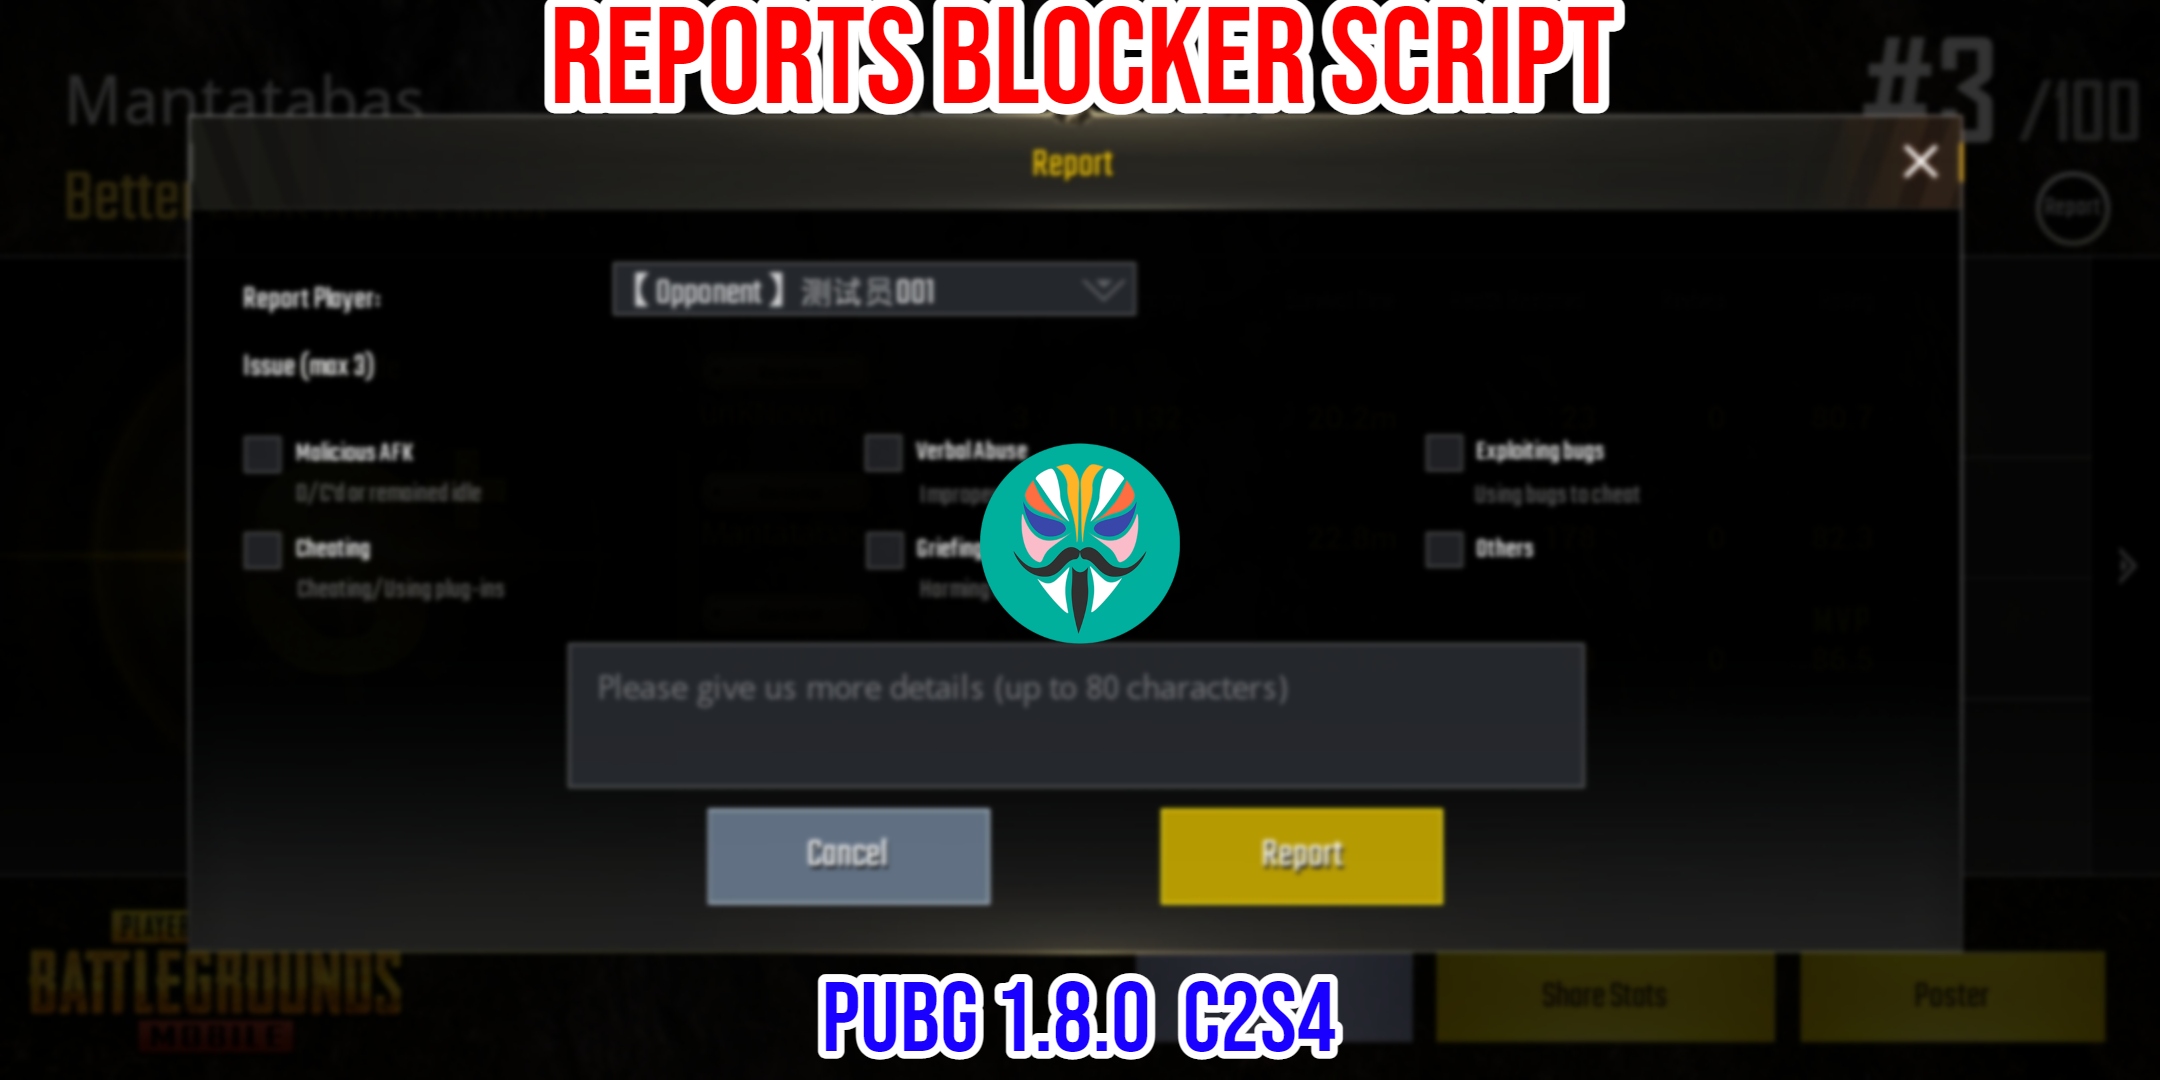 You are currently viewing PUBG 1.8.0 Reports Blocker Script C2S4